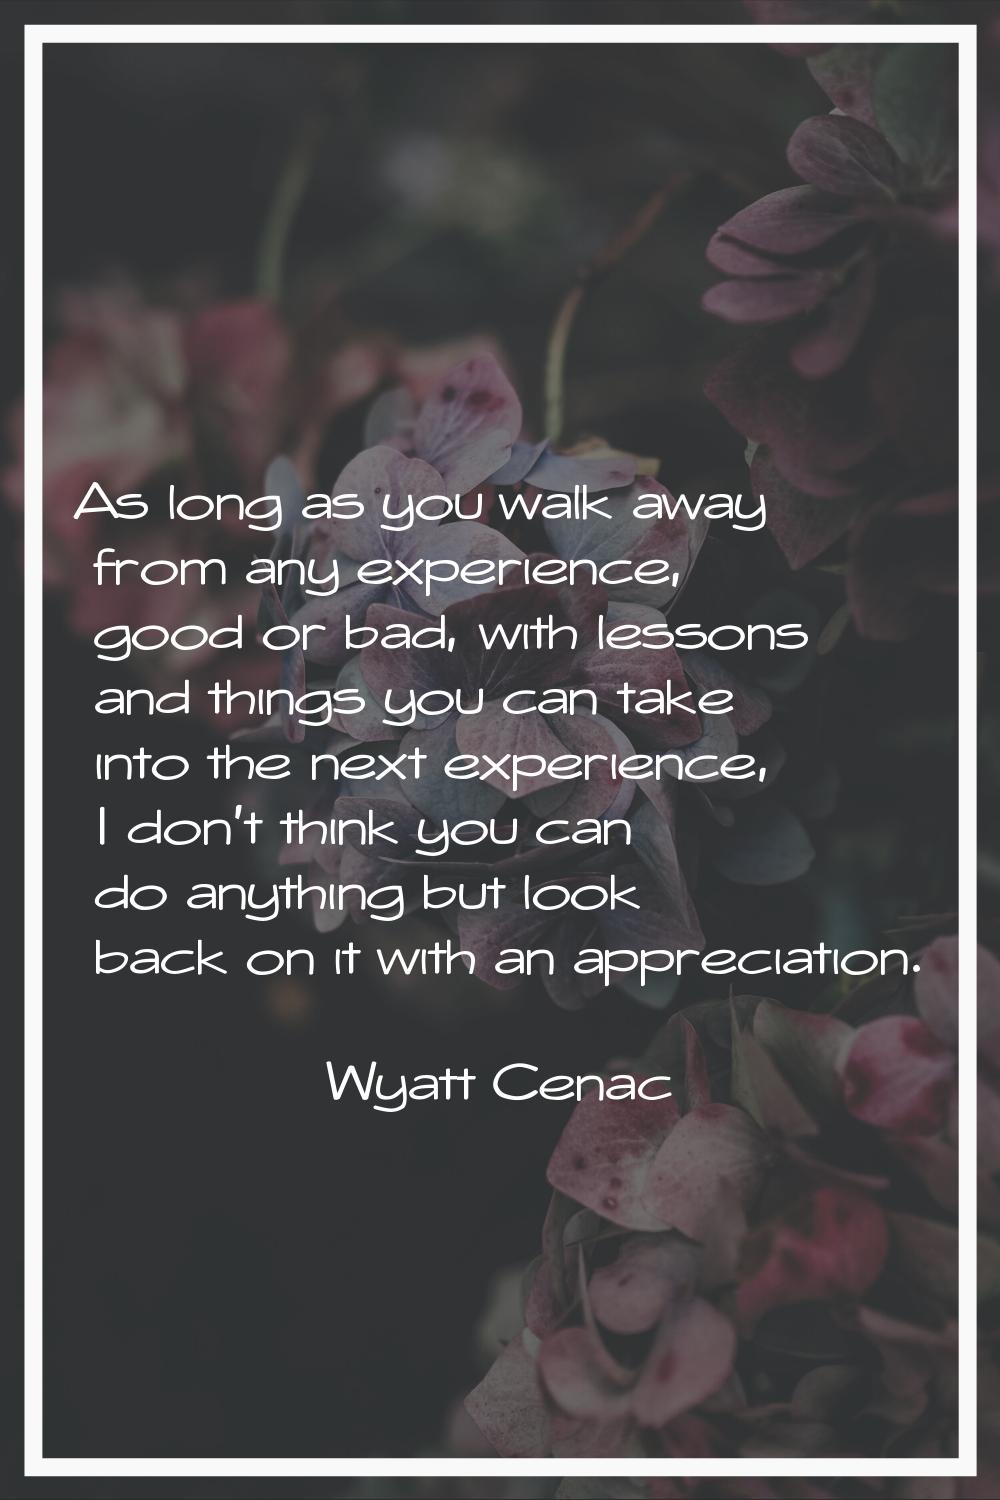 As long as you walk away from any experience, good or bad, with lessons and things you can take int